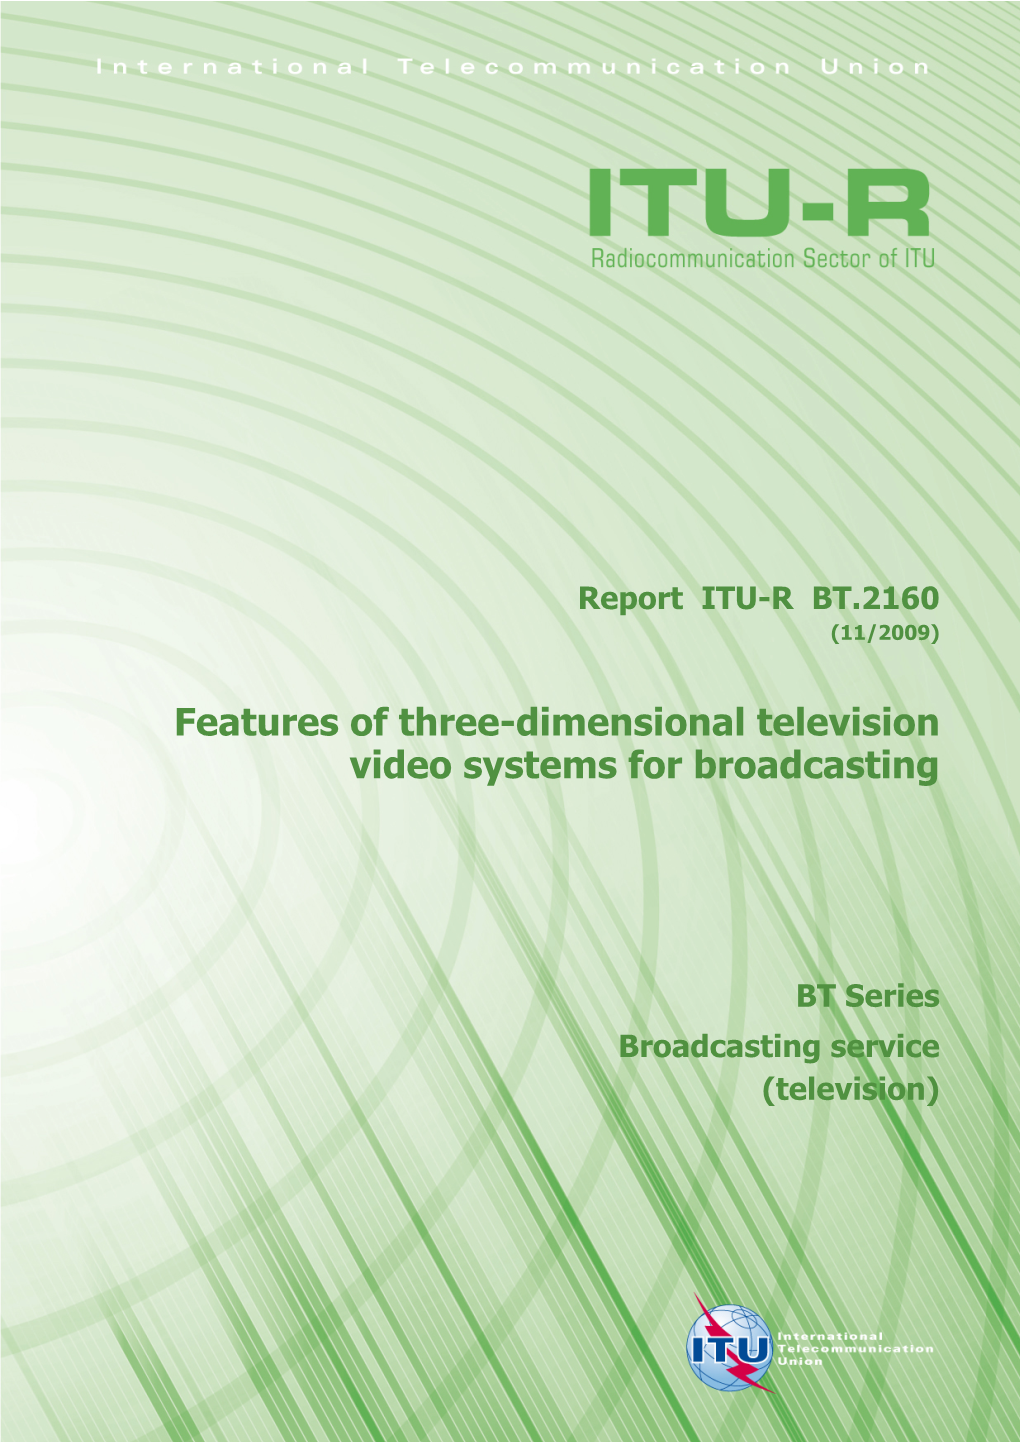 Features of Three-Dimensional Television Video Systems for Broadcasting